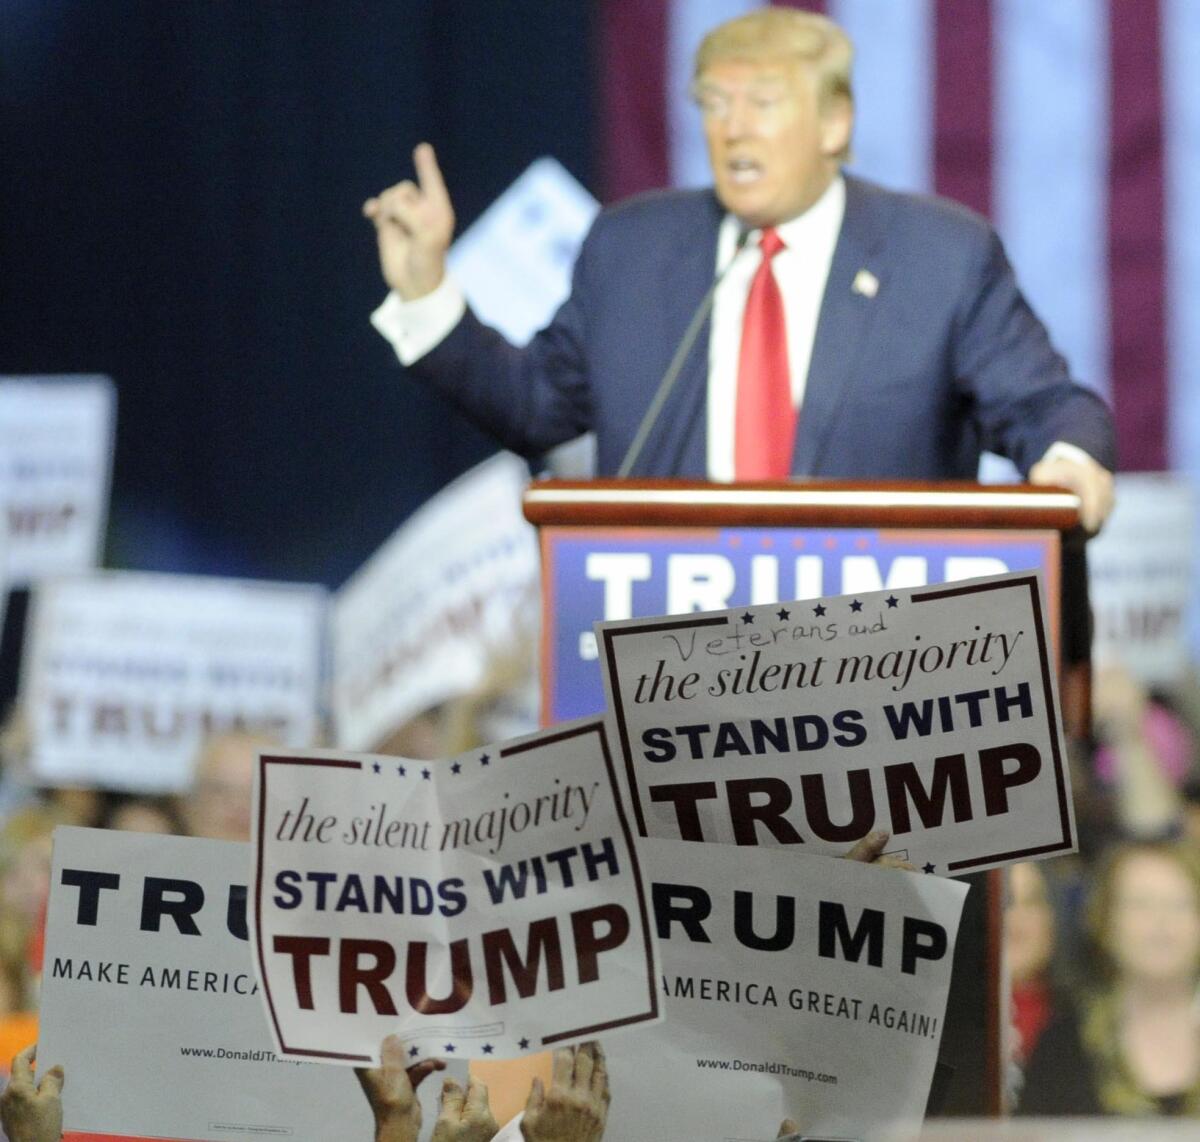 Fans show support as Republican presidential candidate Donald Trump speaks during a campaign stop Saturday in Birmingham, Ala. That his message of intolerance resonates says more about Americans than it does about Trump.